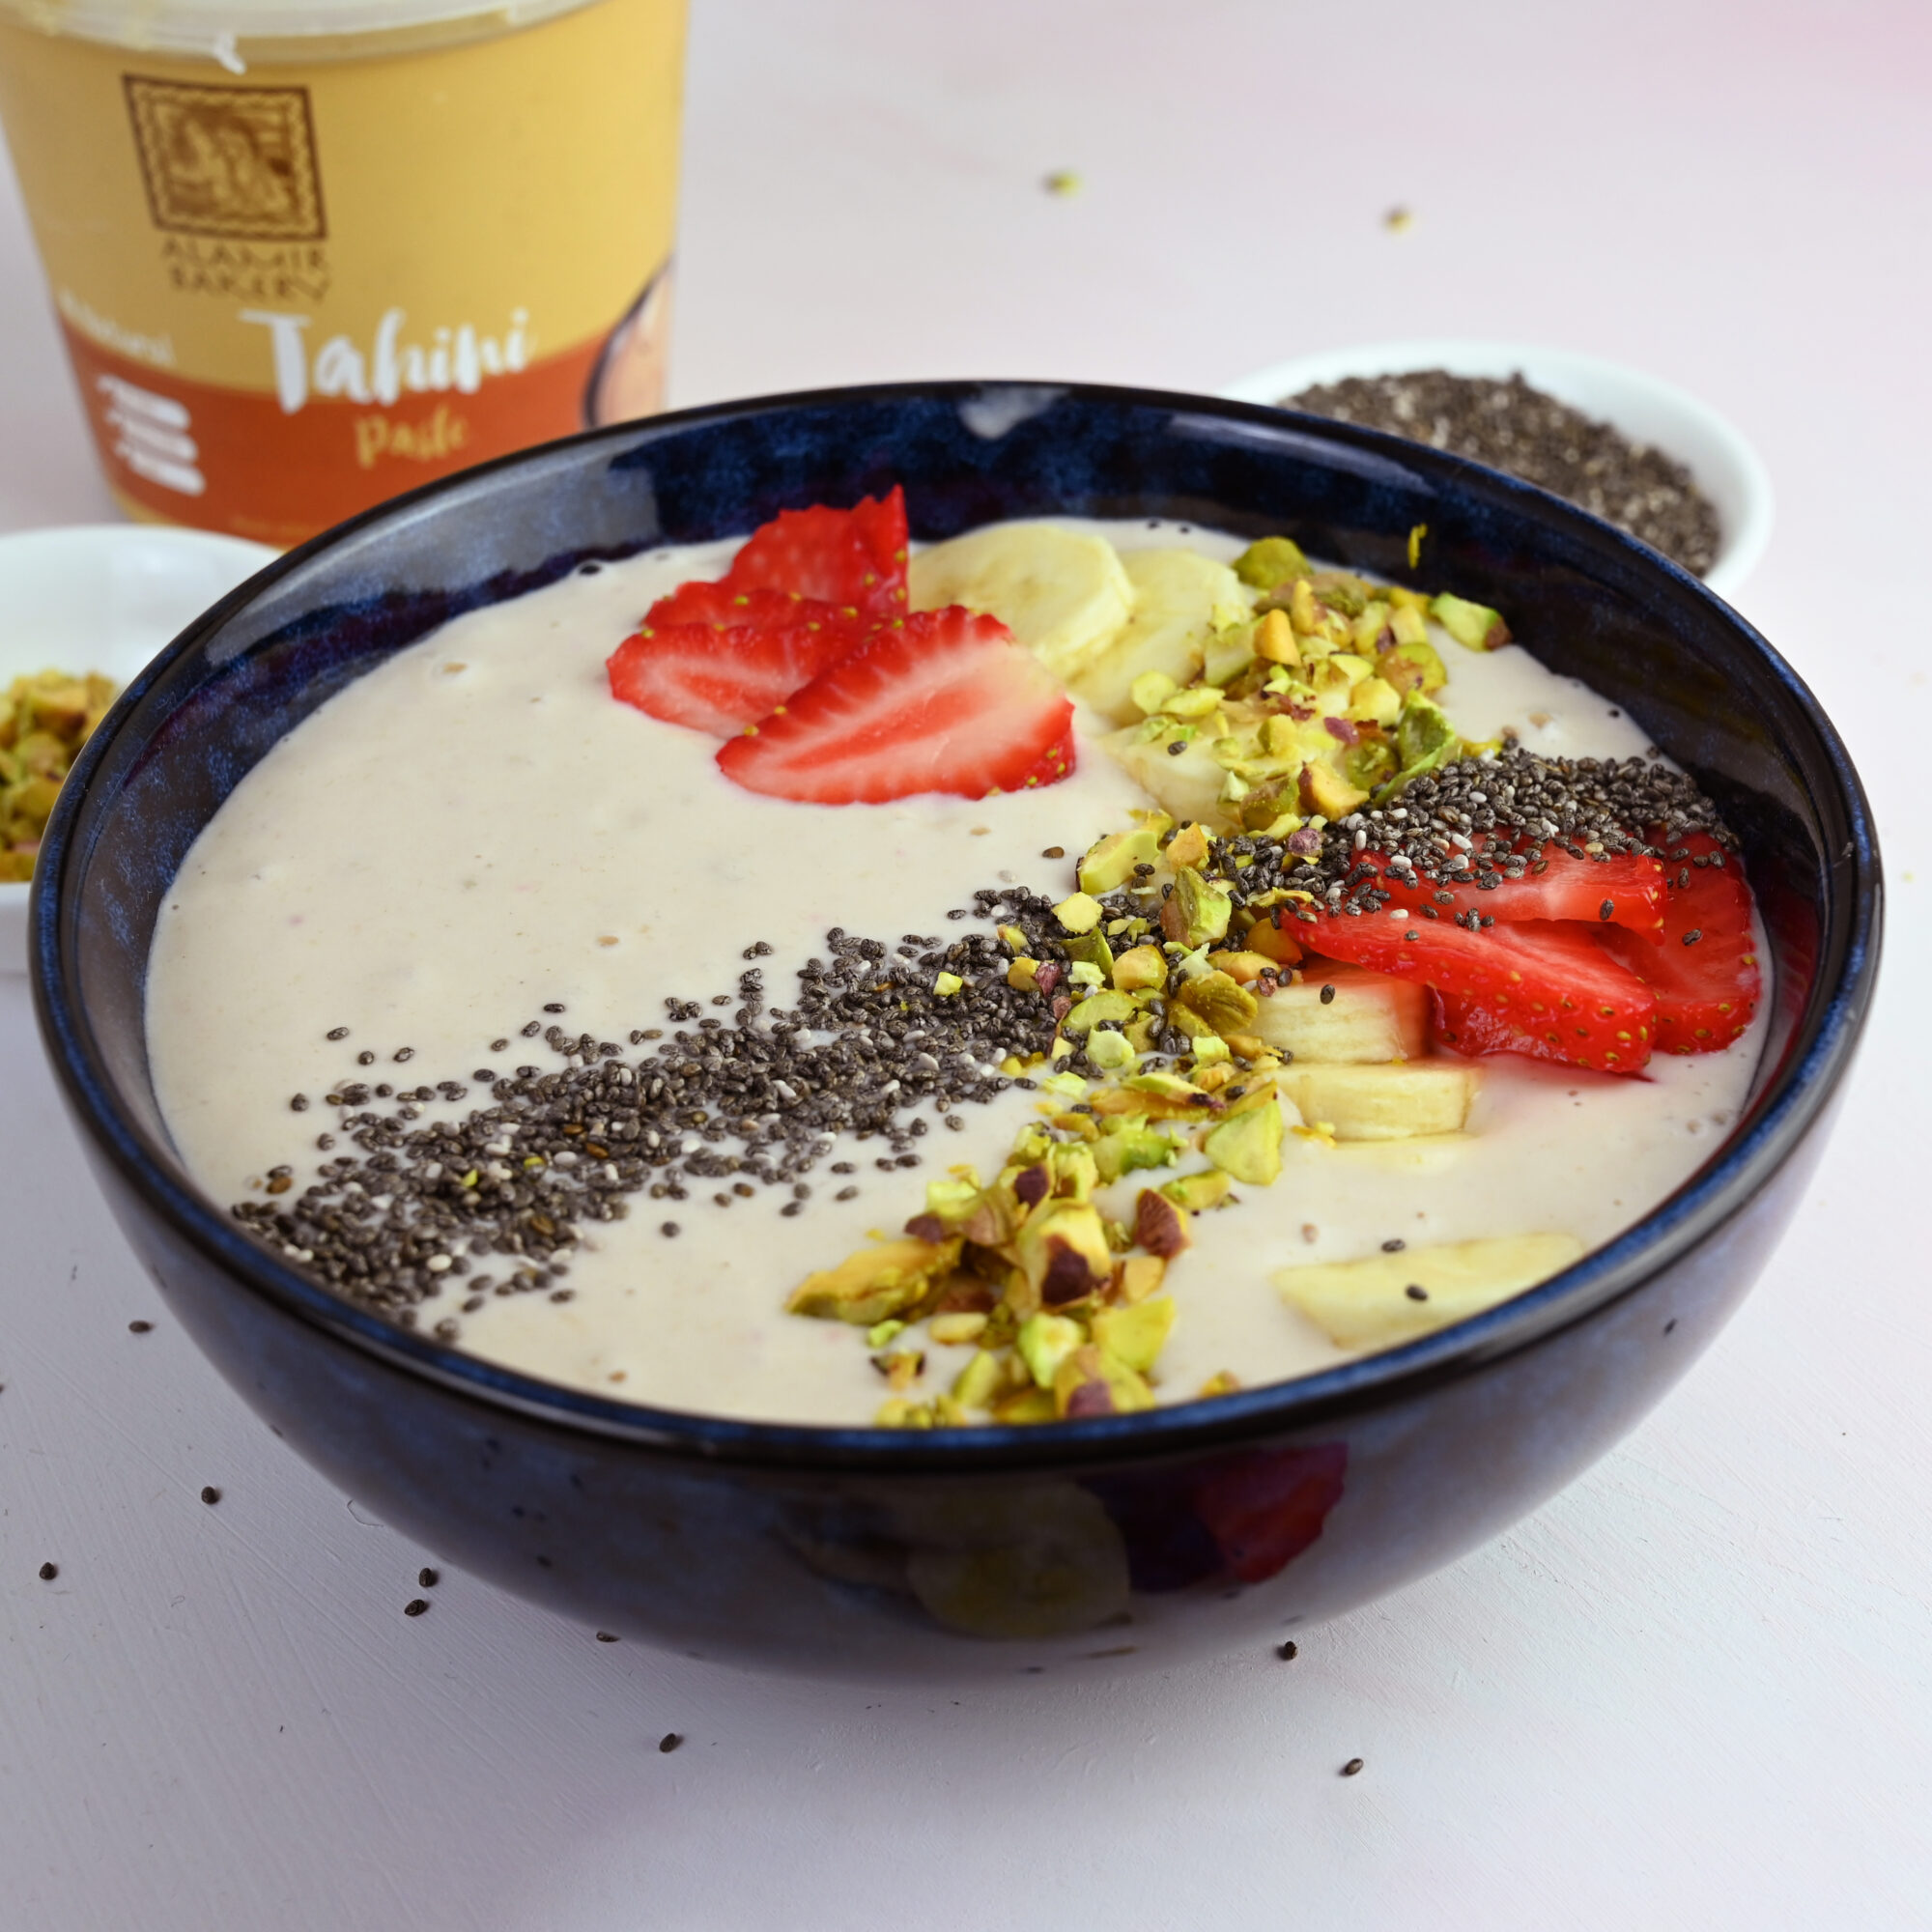 Top your thick creamy banana tahini bowl with your favourite toppings